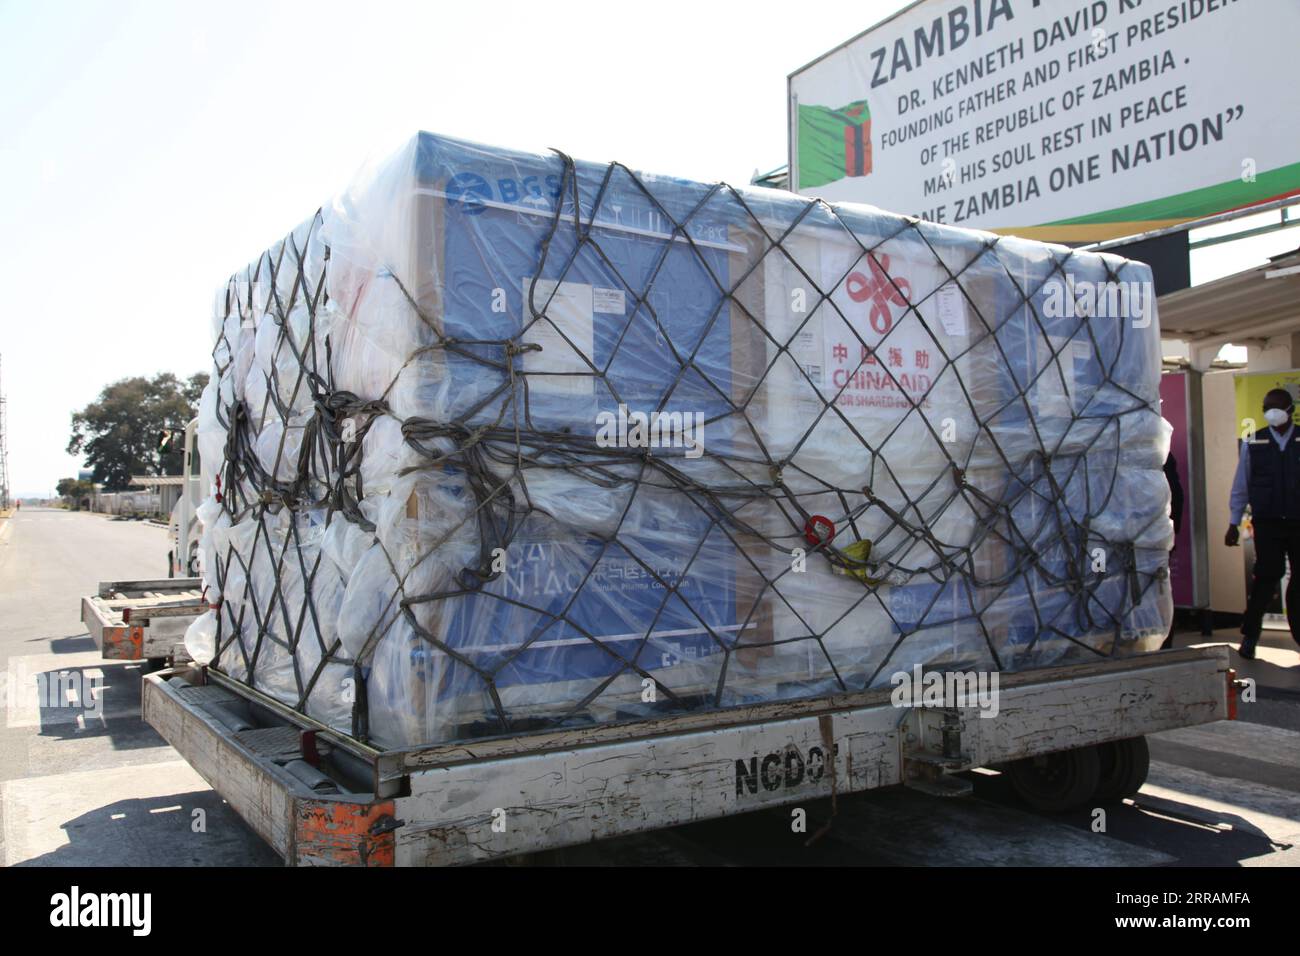 News Bilder des Tages 210807 -- LUSAKA, Aug. 7, 2021 -- A batch of China s Sinopharm vaccines arrive at the Kenneth Kaunda International Airport in Lusaka, Zambia, on Aug. 7, 2021. A batch of China s Sinopharm vaccines arrived in Zambia on Saturday to be part of the southern African nation s basket of COVID-19 vaccines.  ZAMBIA-LUSAKA-CHINA-COVID-19 VACCINES-ARRIVAL ZhaoxYupeng PUBLICATIONxNOTxINxCHN Stock Photo